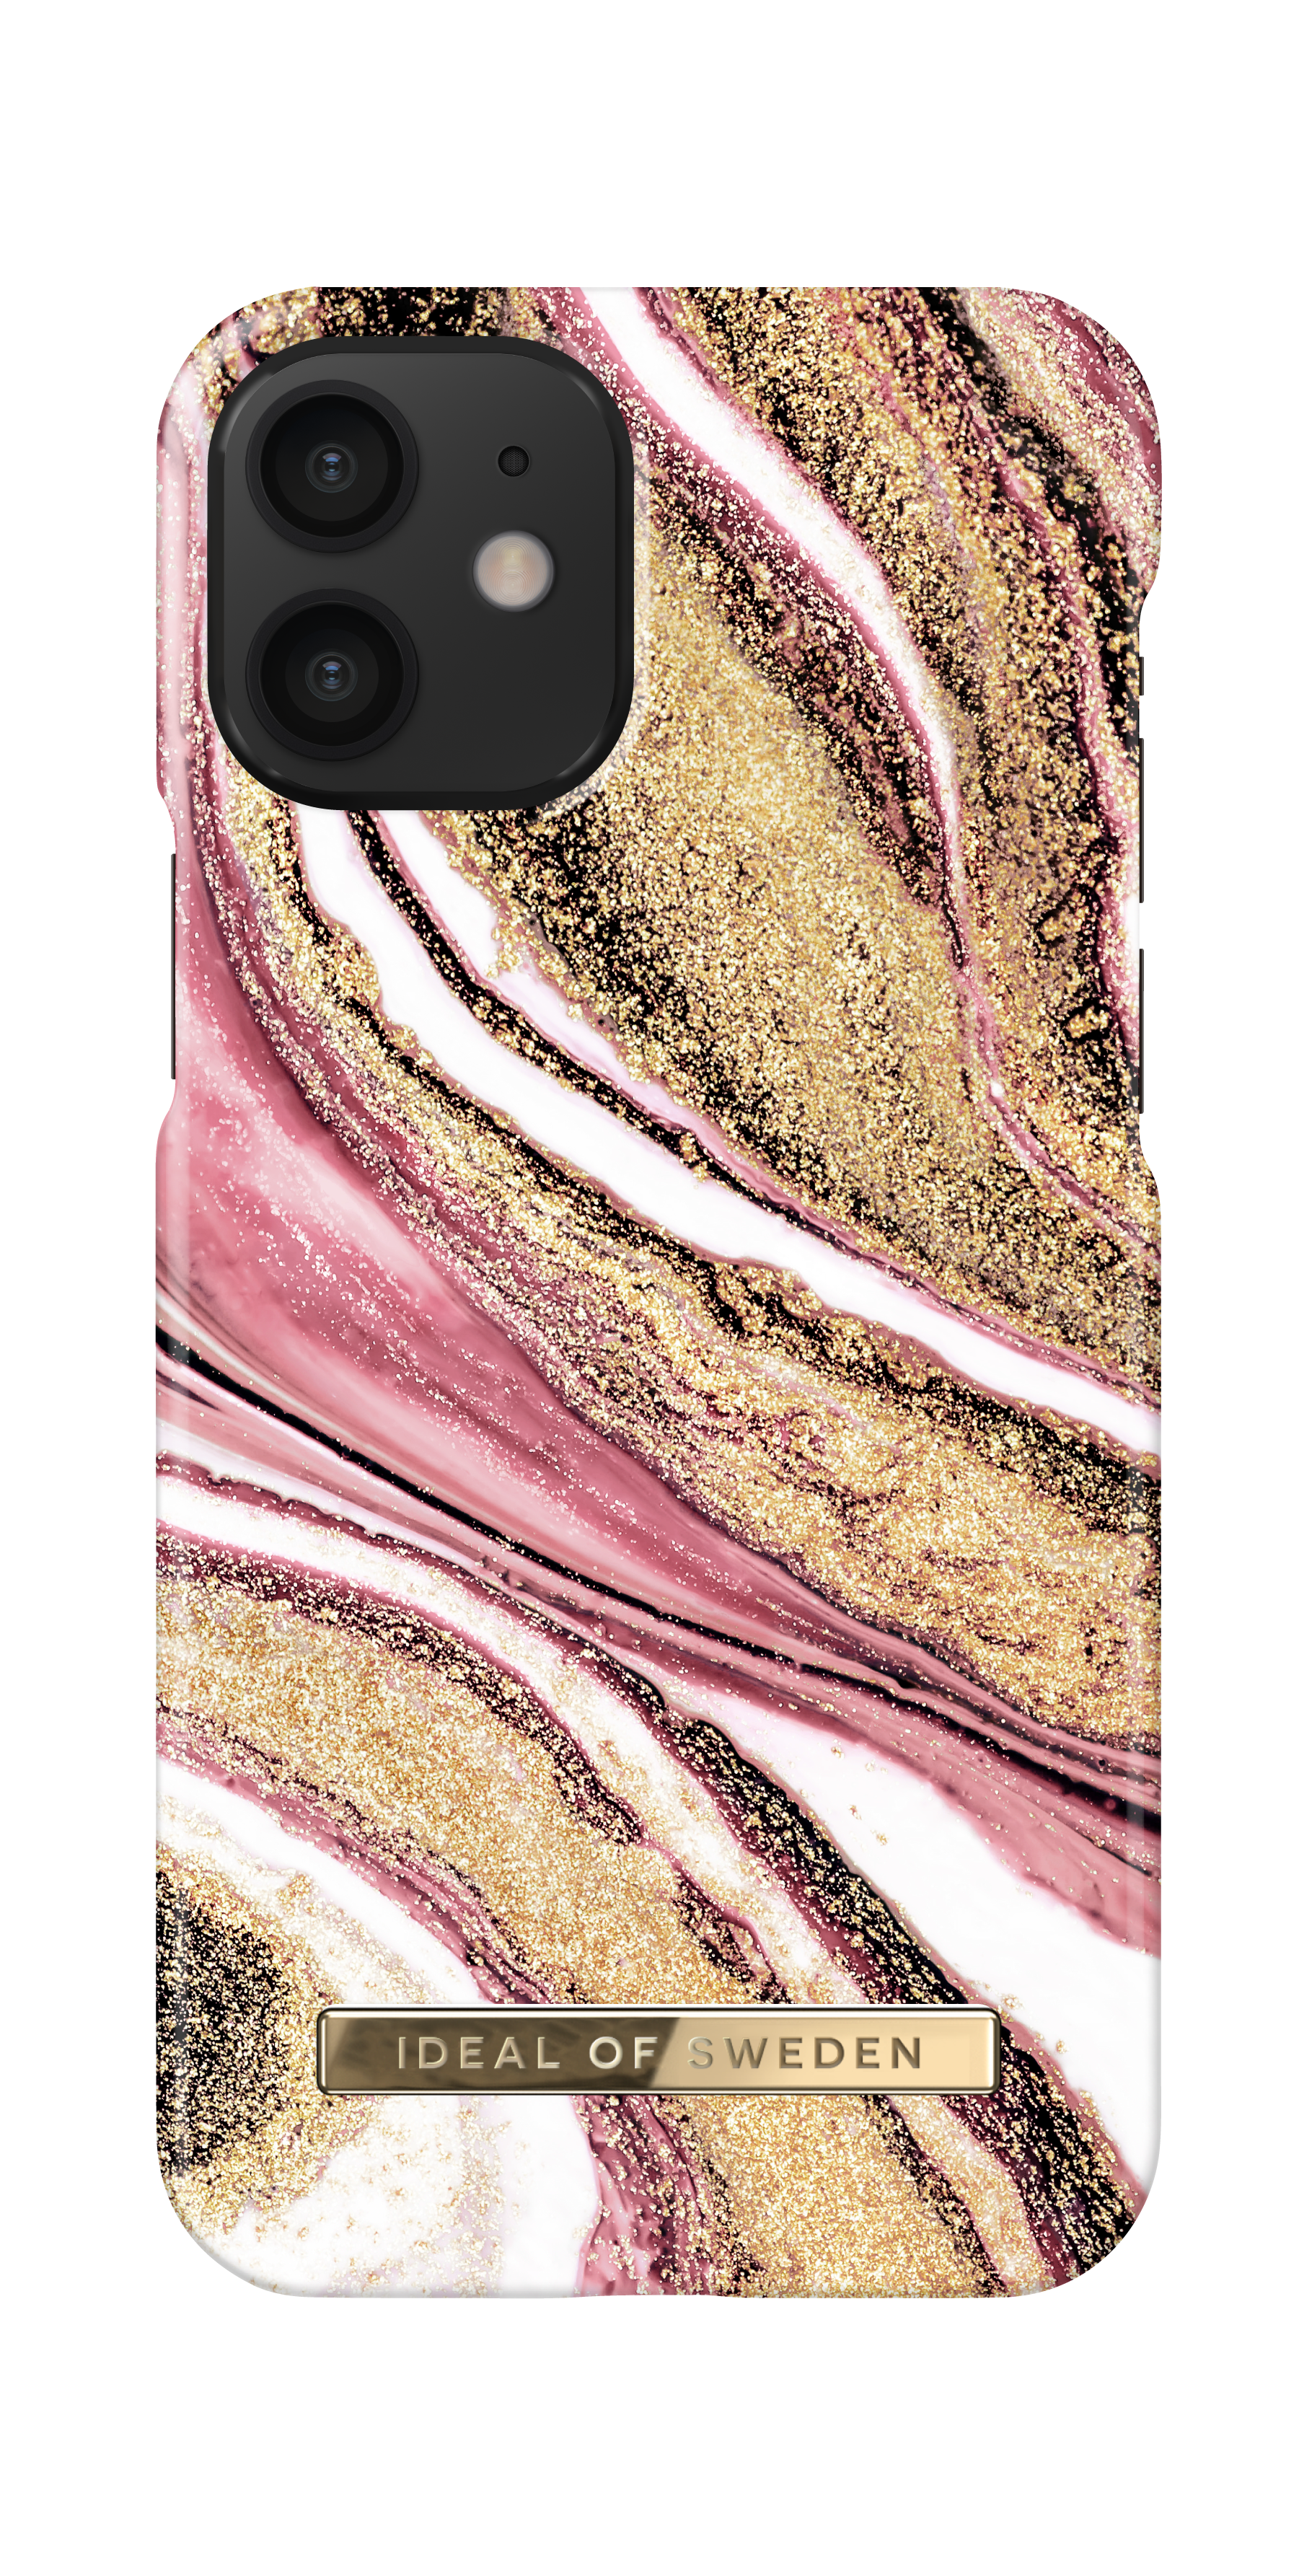 IDFCSS20-I2054-193, Mini, IDEAL Apple, SWEDEN Cosmic 12 Swirl Backcover, IPhone OF Pink